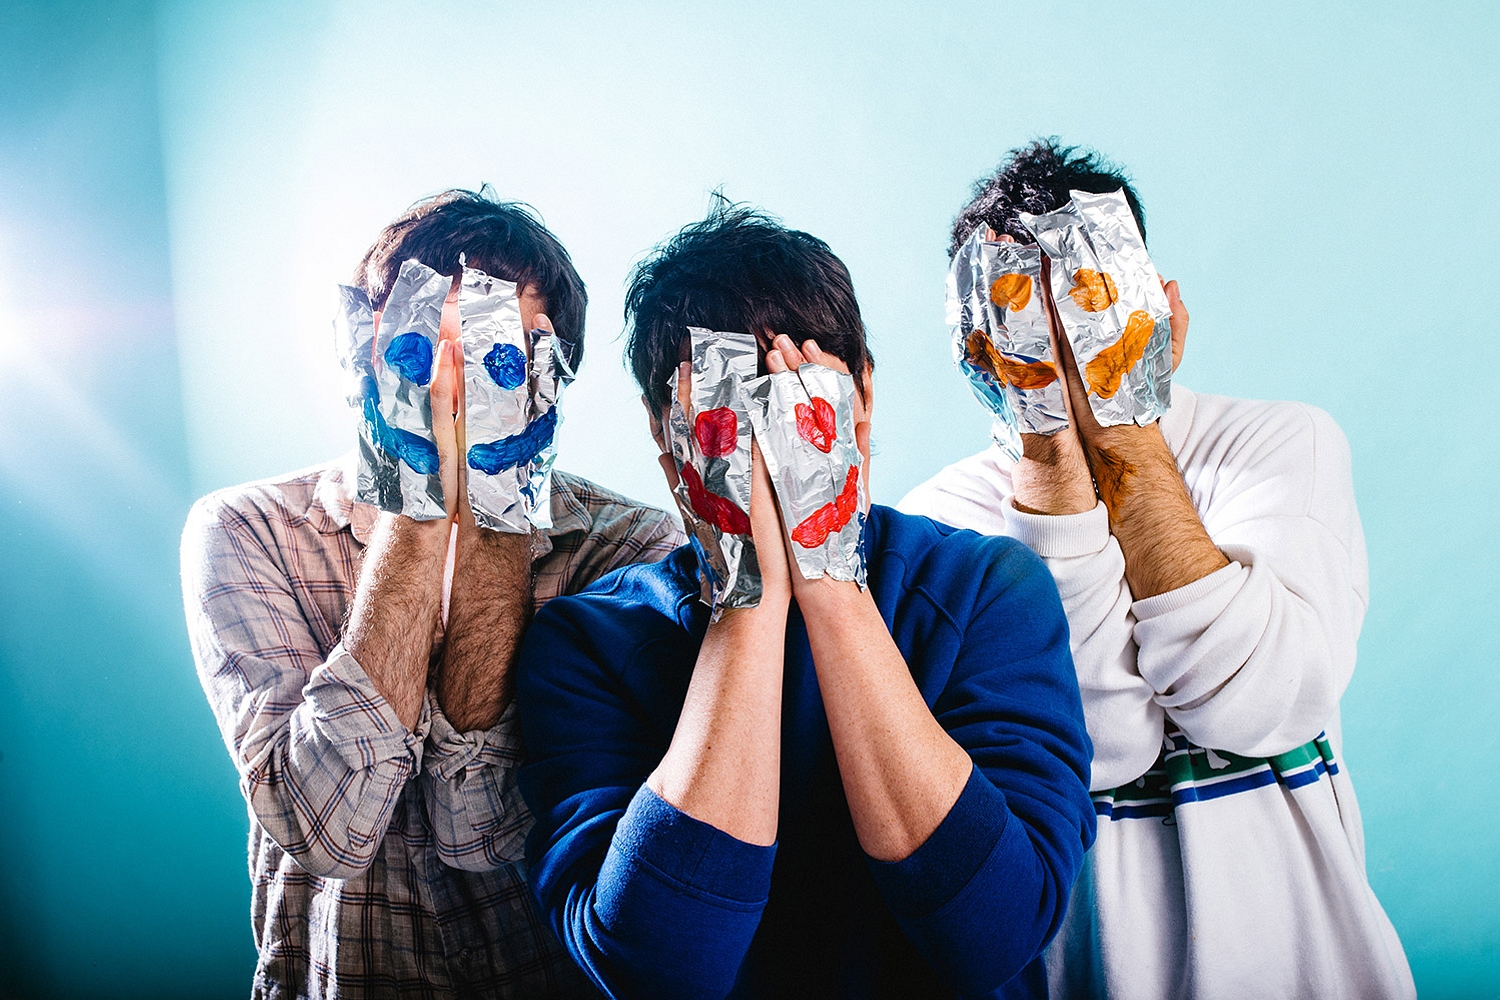 Animal Collective announce their own festival, expand tour